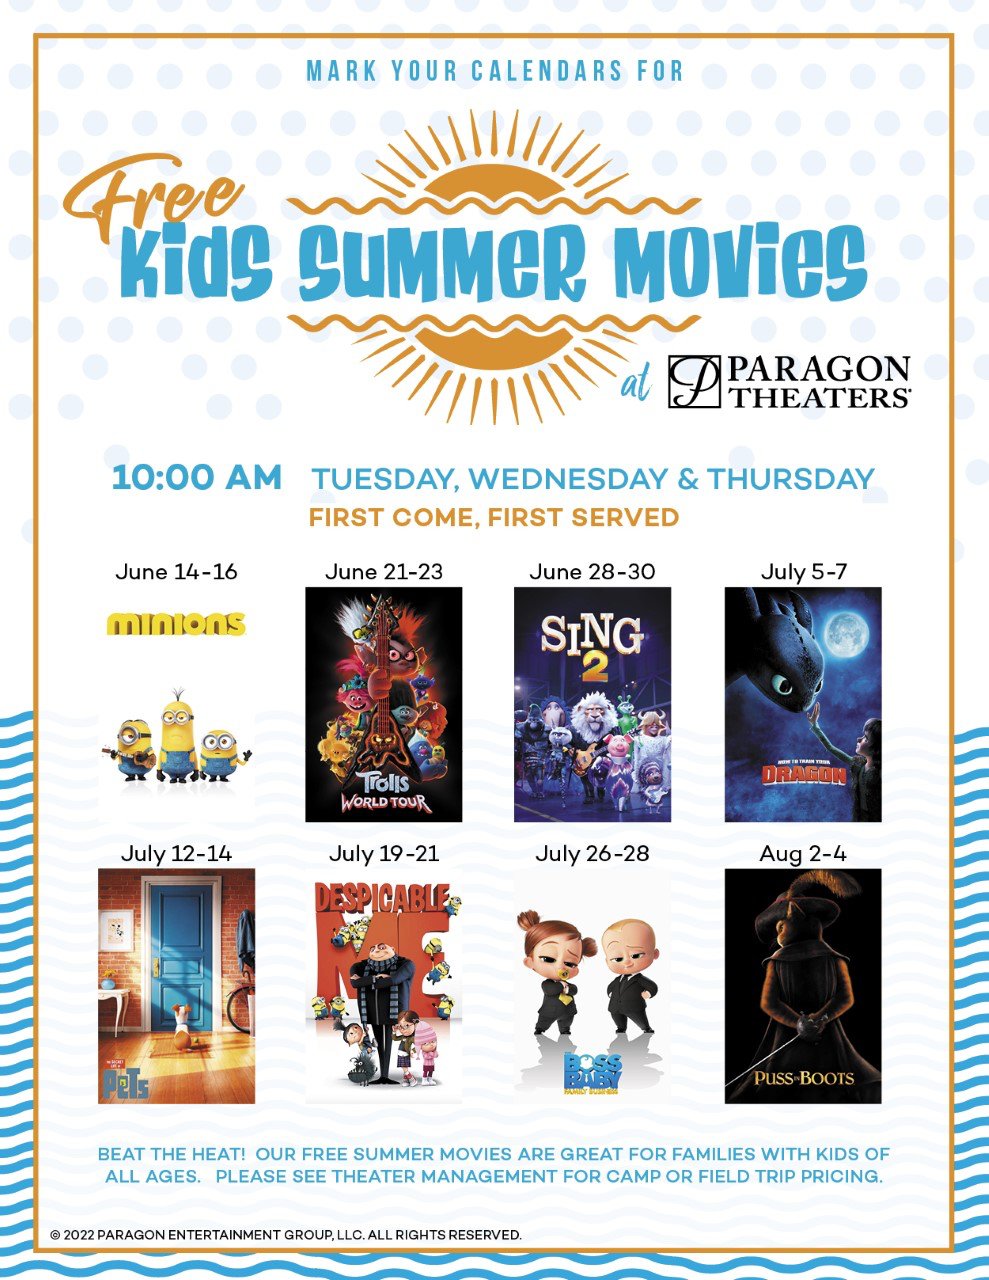 Free Kids Summer Movies at Paragon Theaters